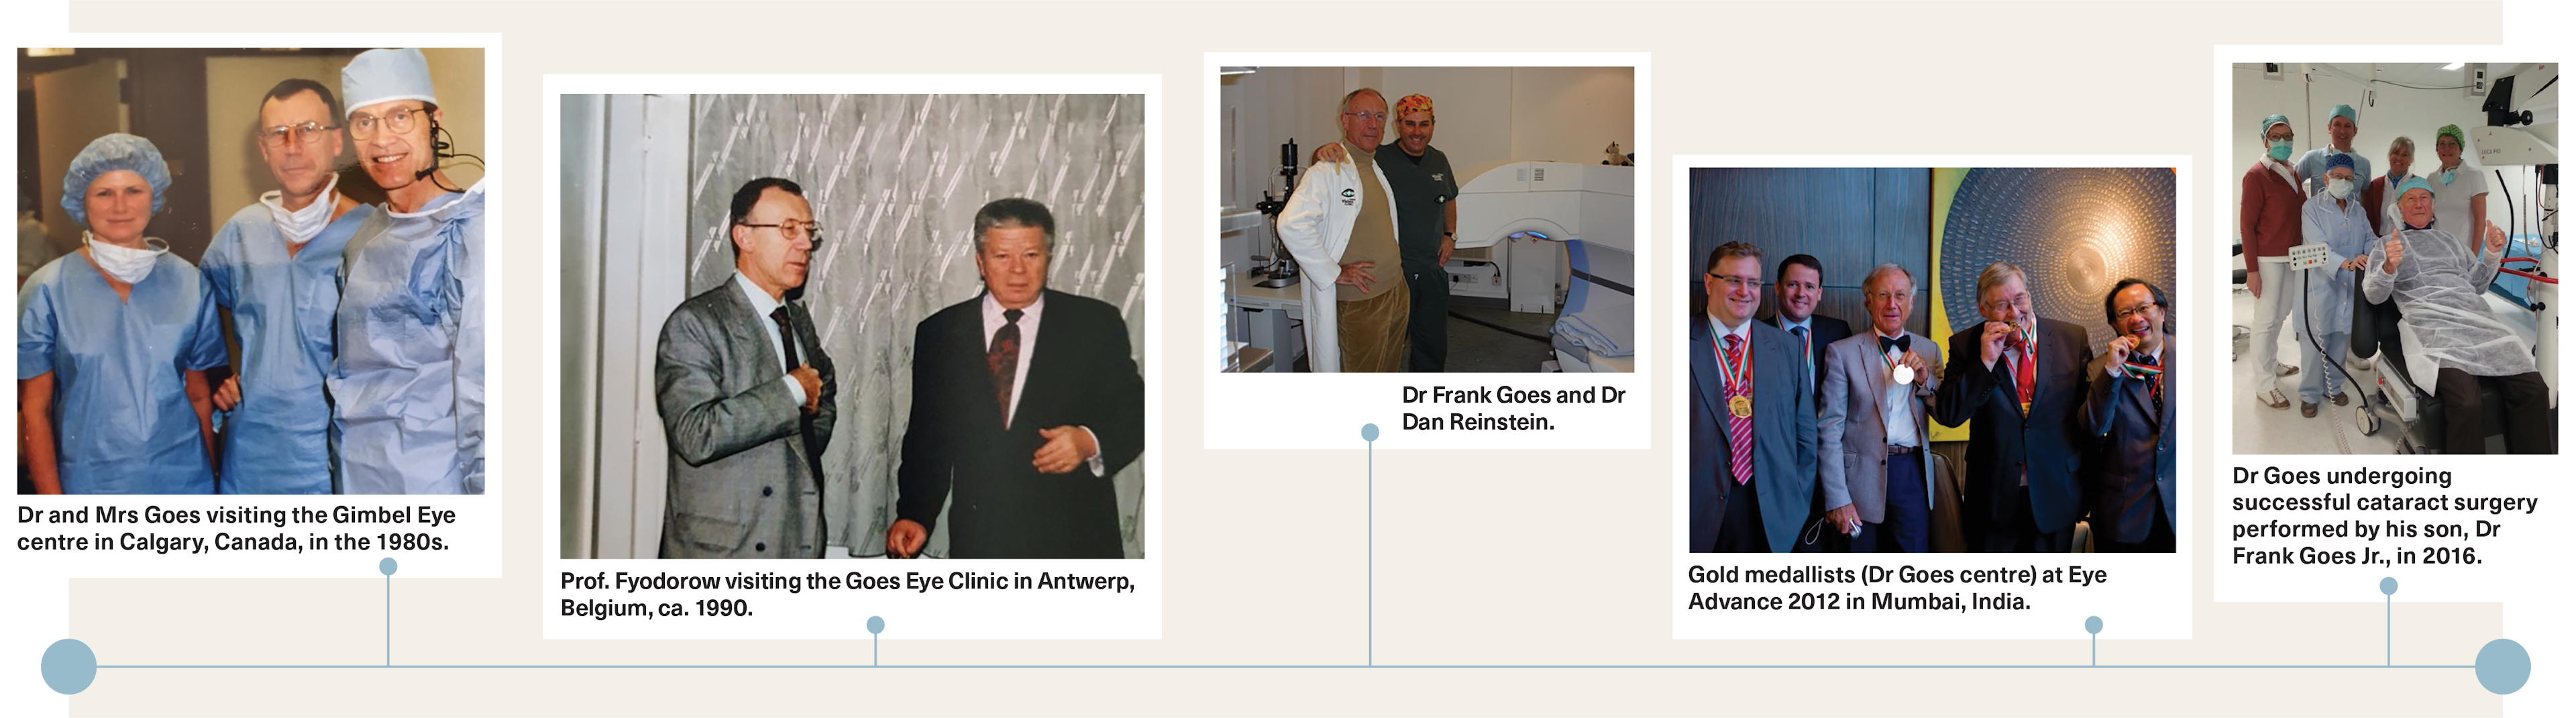 Timeline of Dr Goes's career in ophthalmology